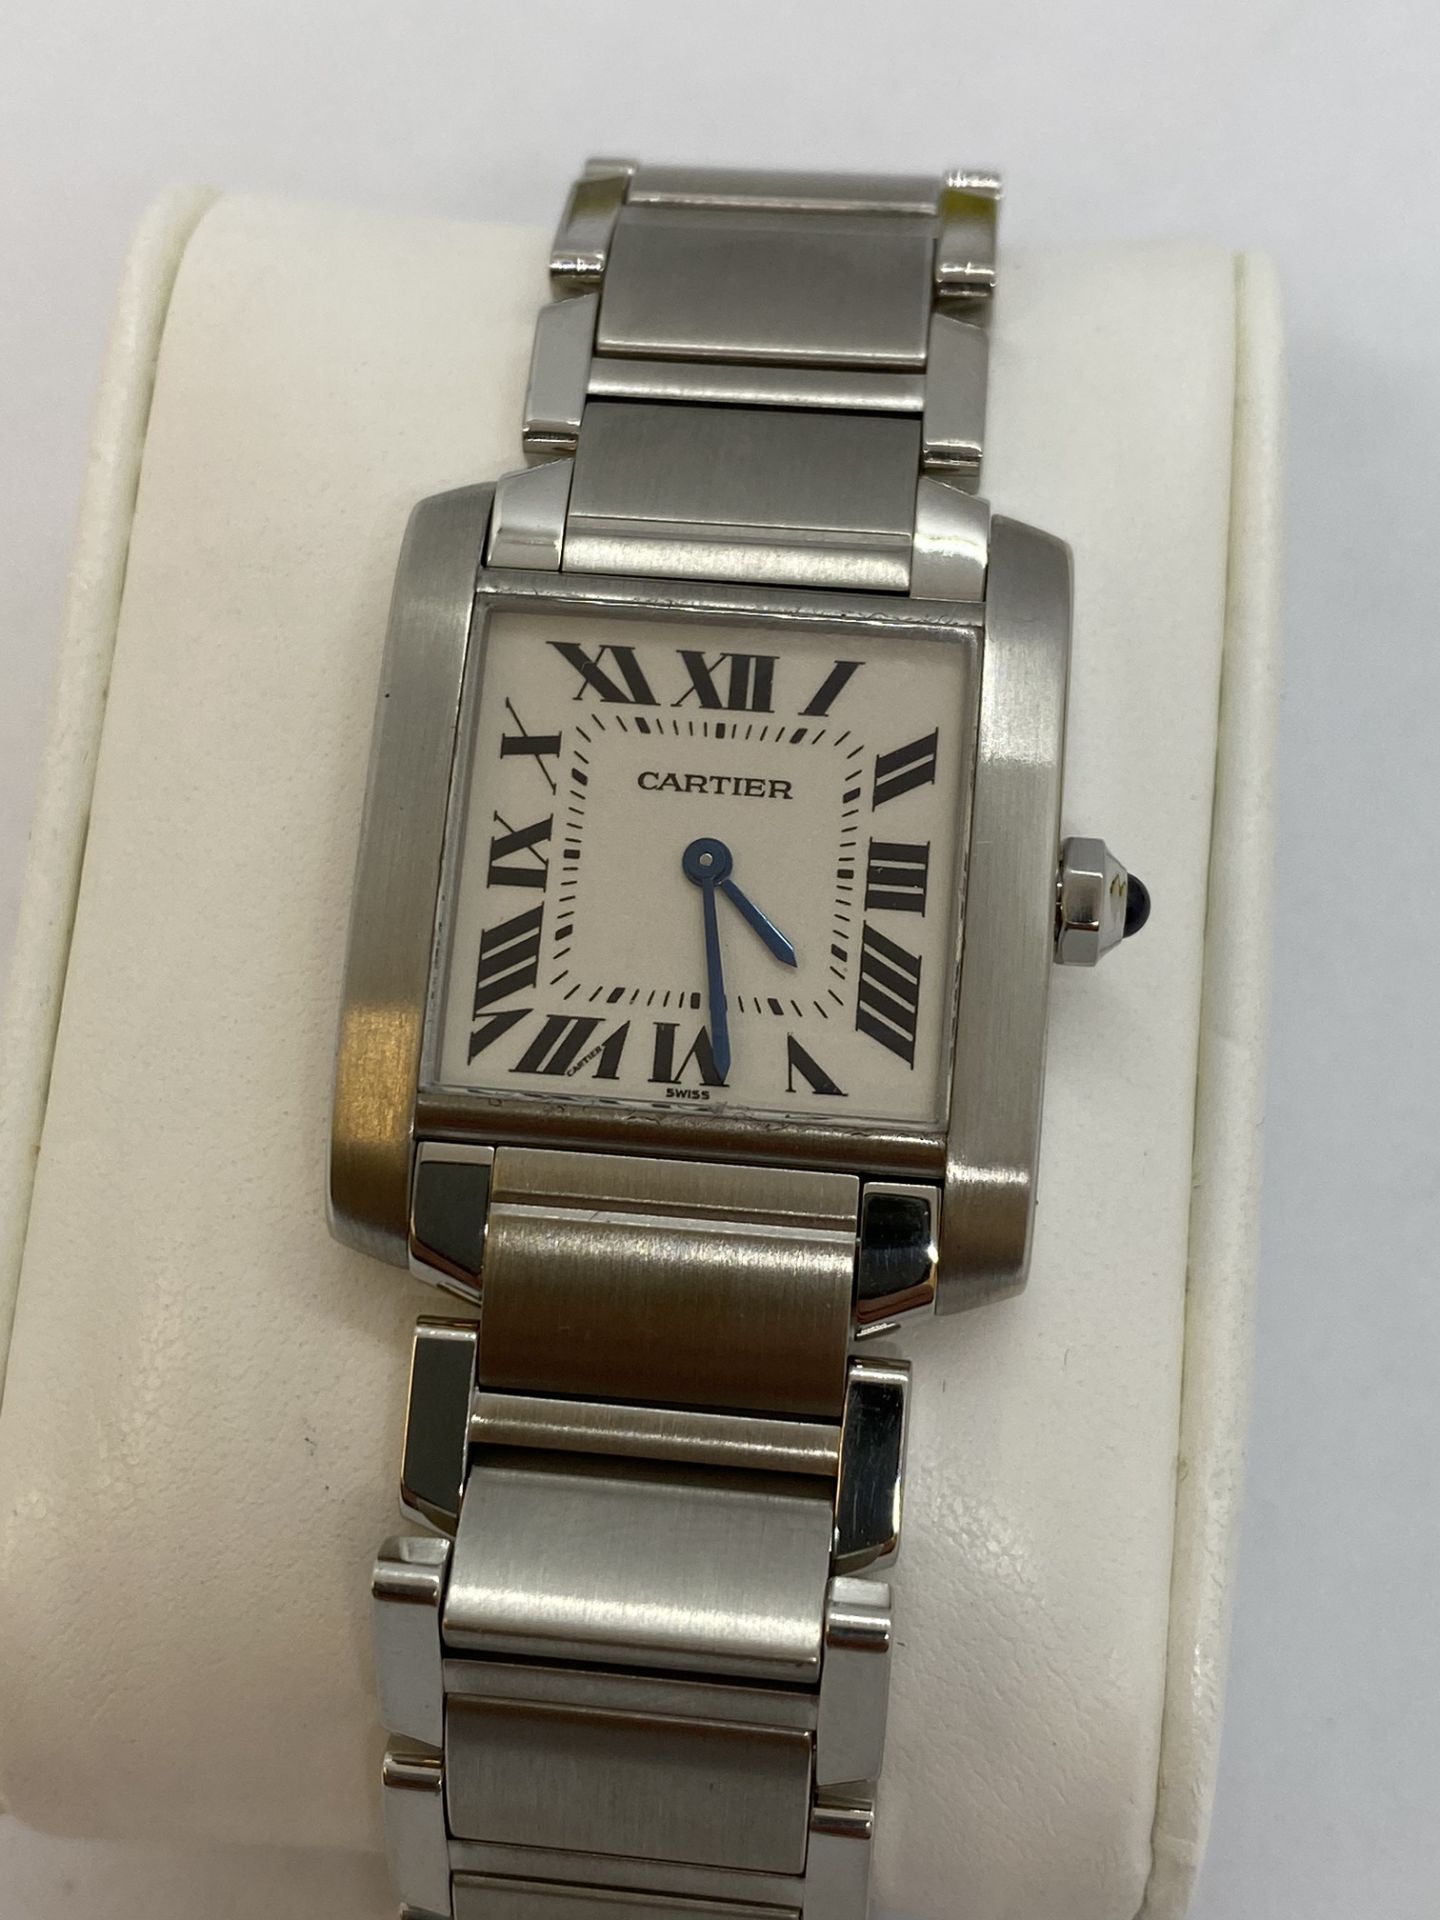 CARTIER TANK FRANCAISE MEDIUM SIZED WATCH - Image 3 of 8